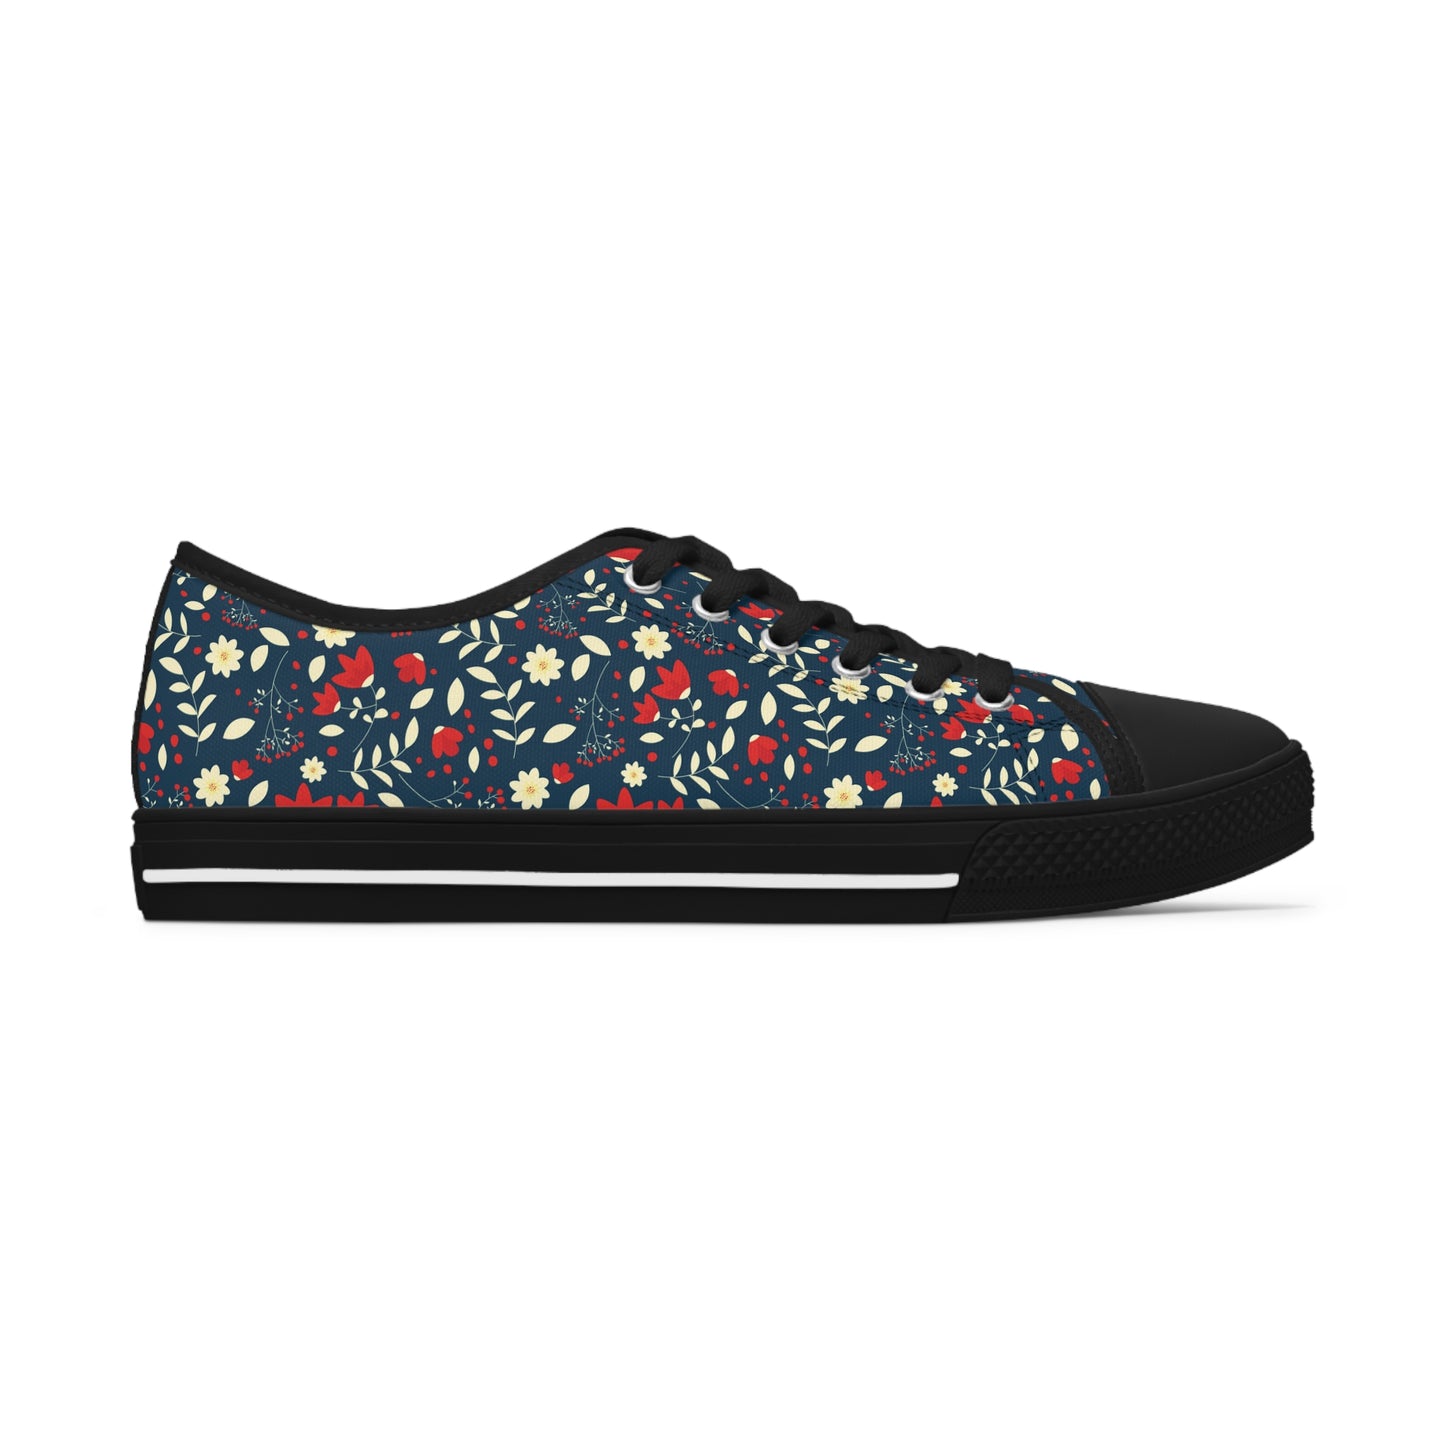 Blossom Valley - Women's Low Top